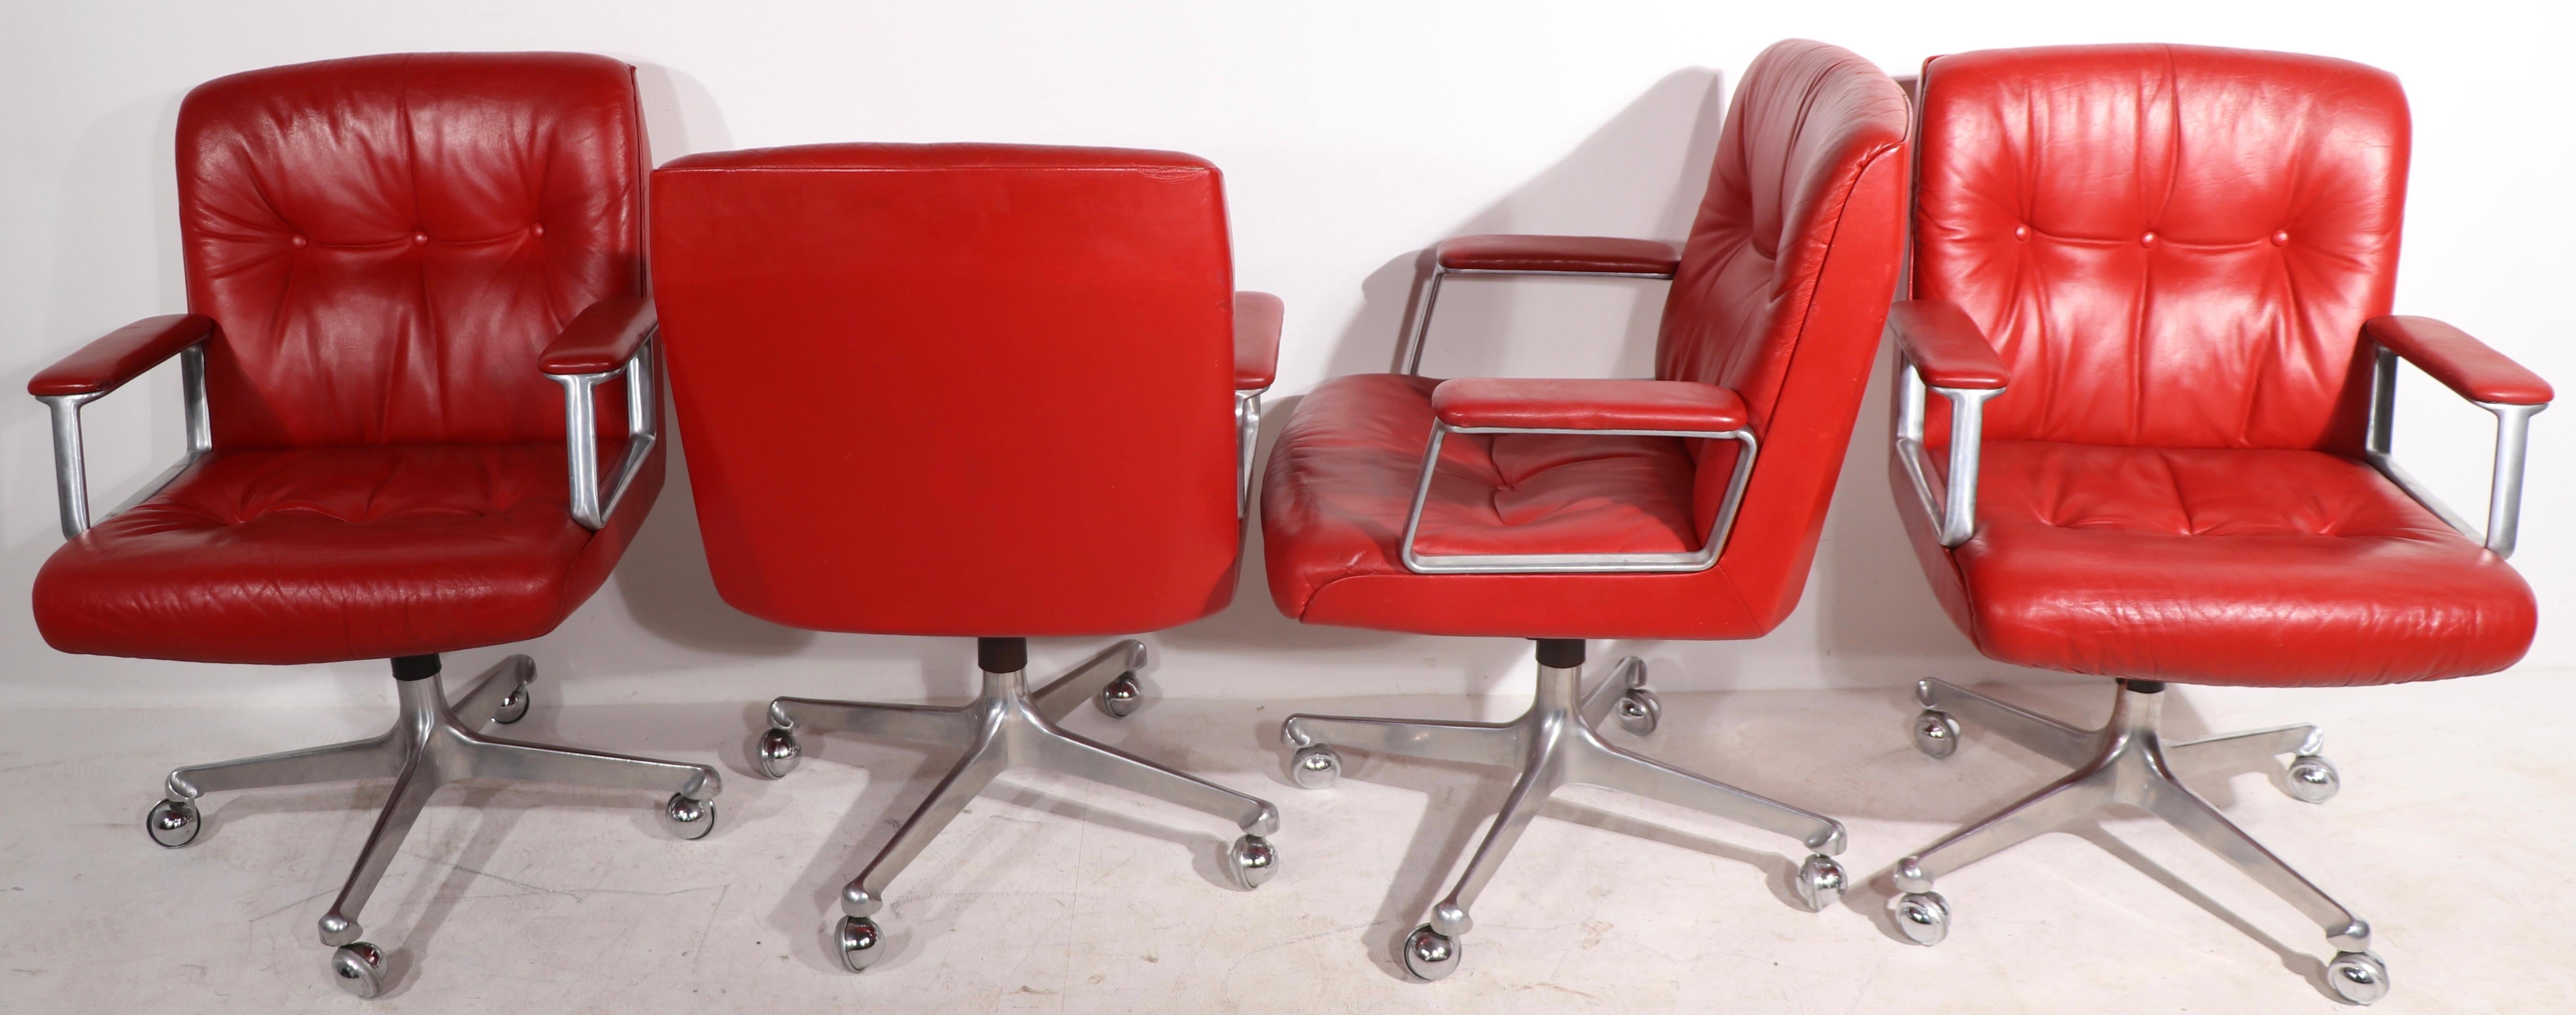 8 P128 Borsani Swivel Desk Chairs in Lipstick Red Leather Upholstery  2